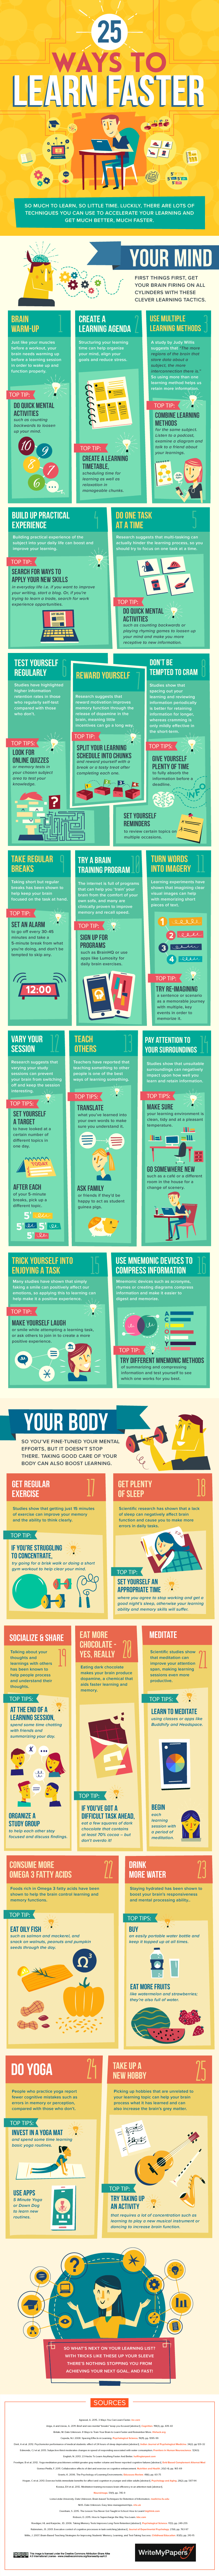 25 Ways to Learn Faster Infographic